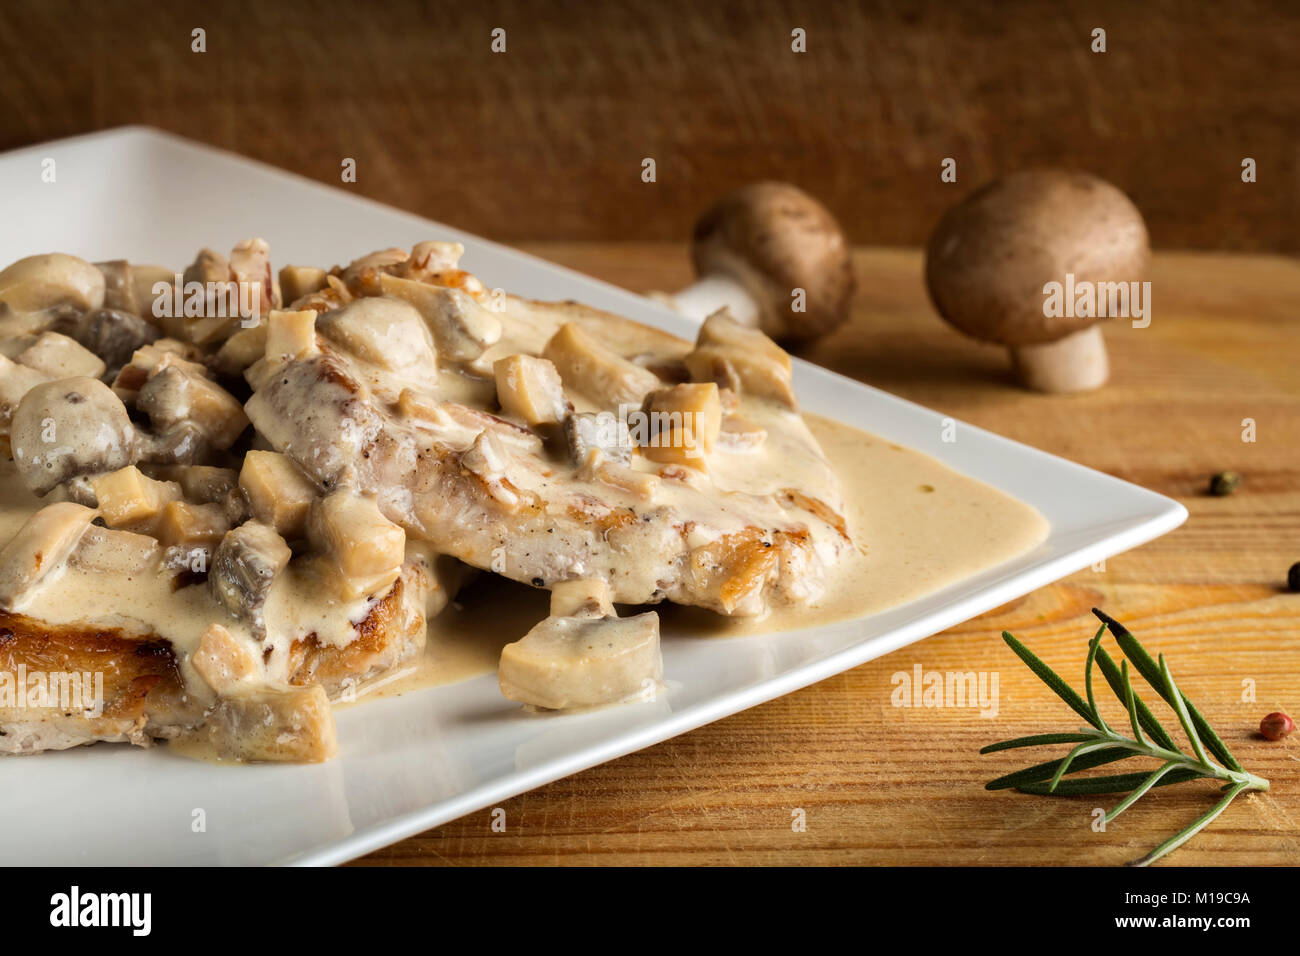 Pork sirloin with white sauce made from sour cream and mushrooms on wooden background Stock Photo